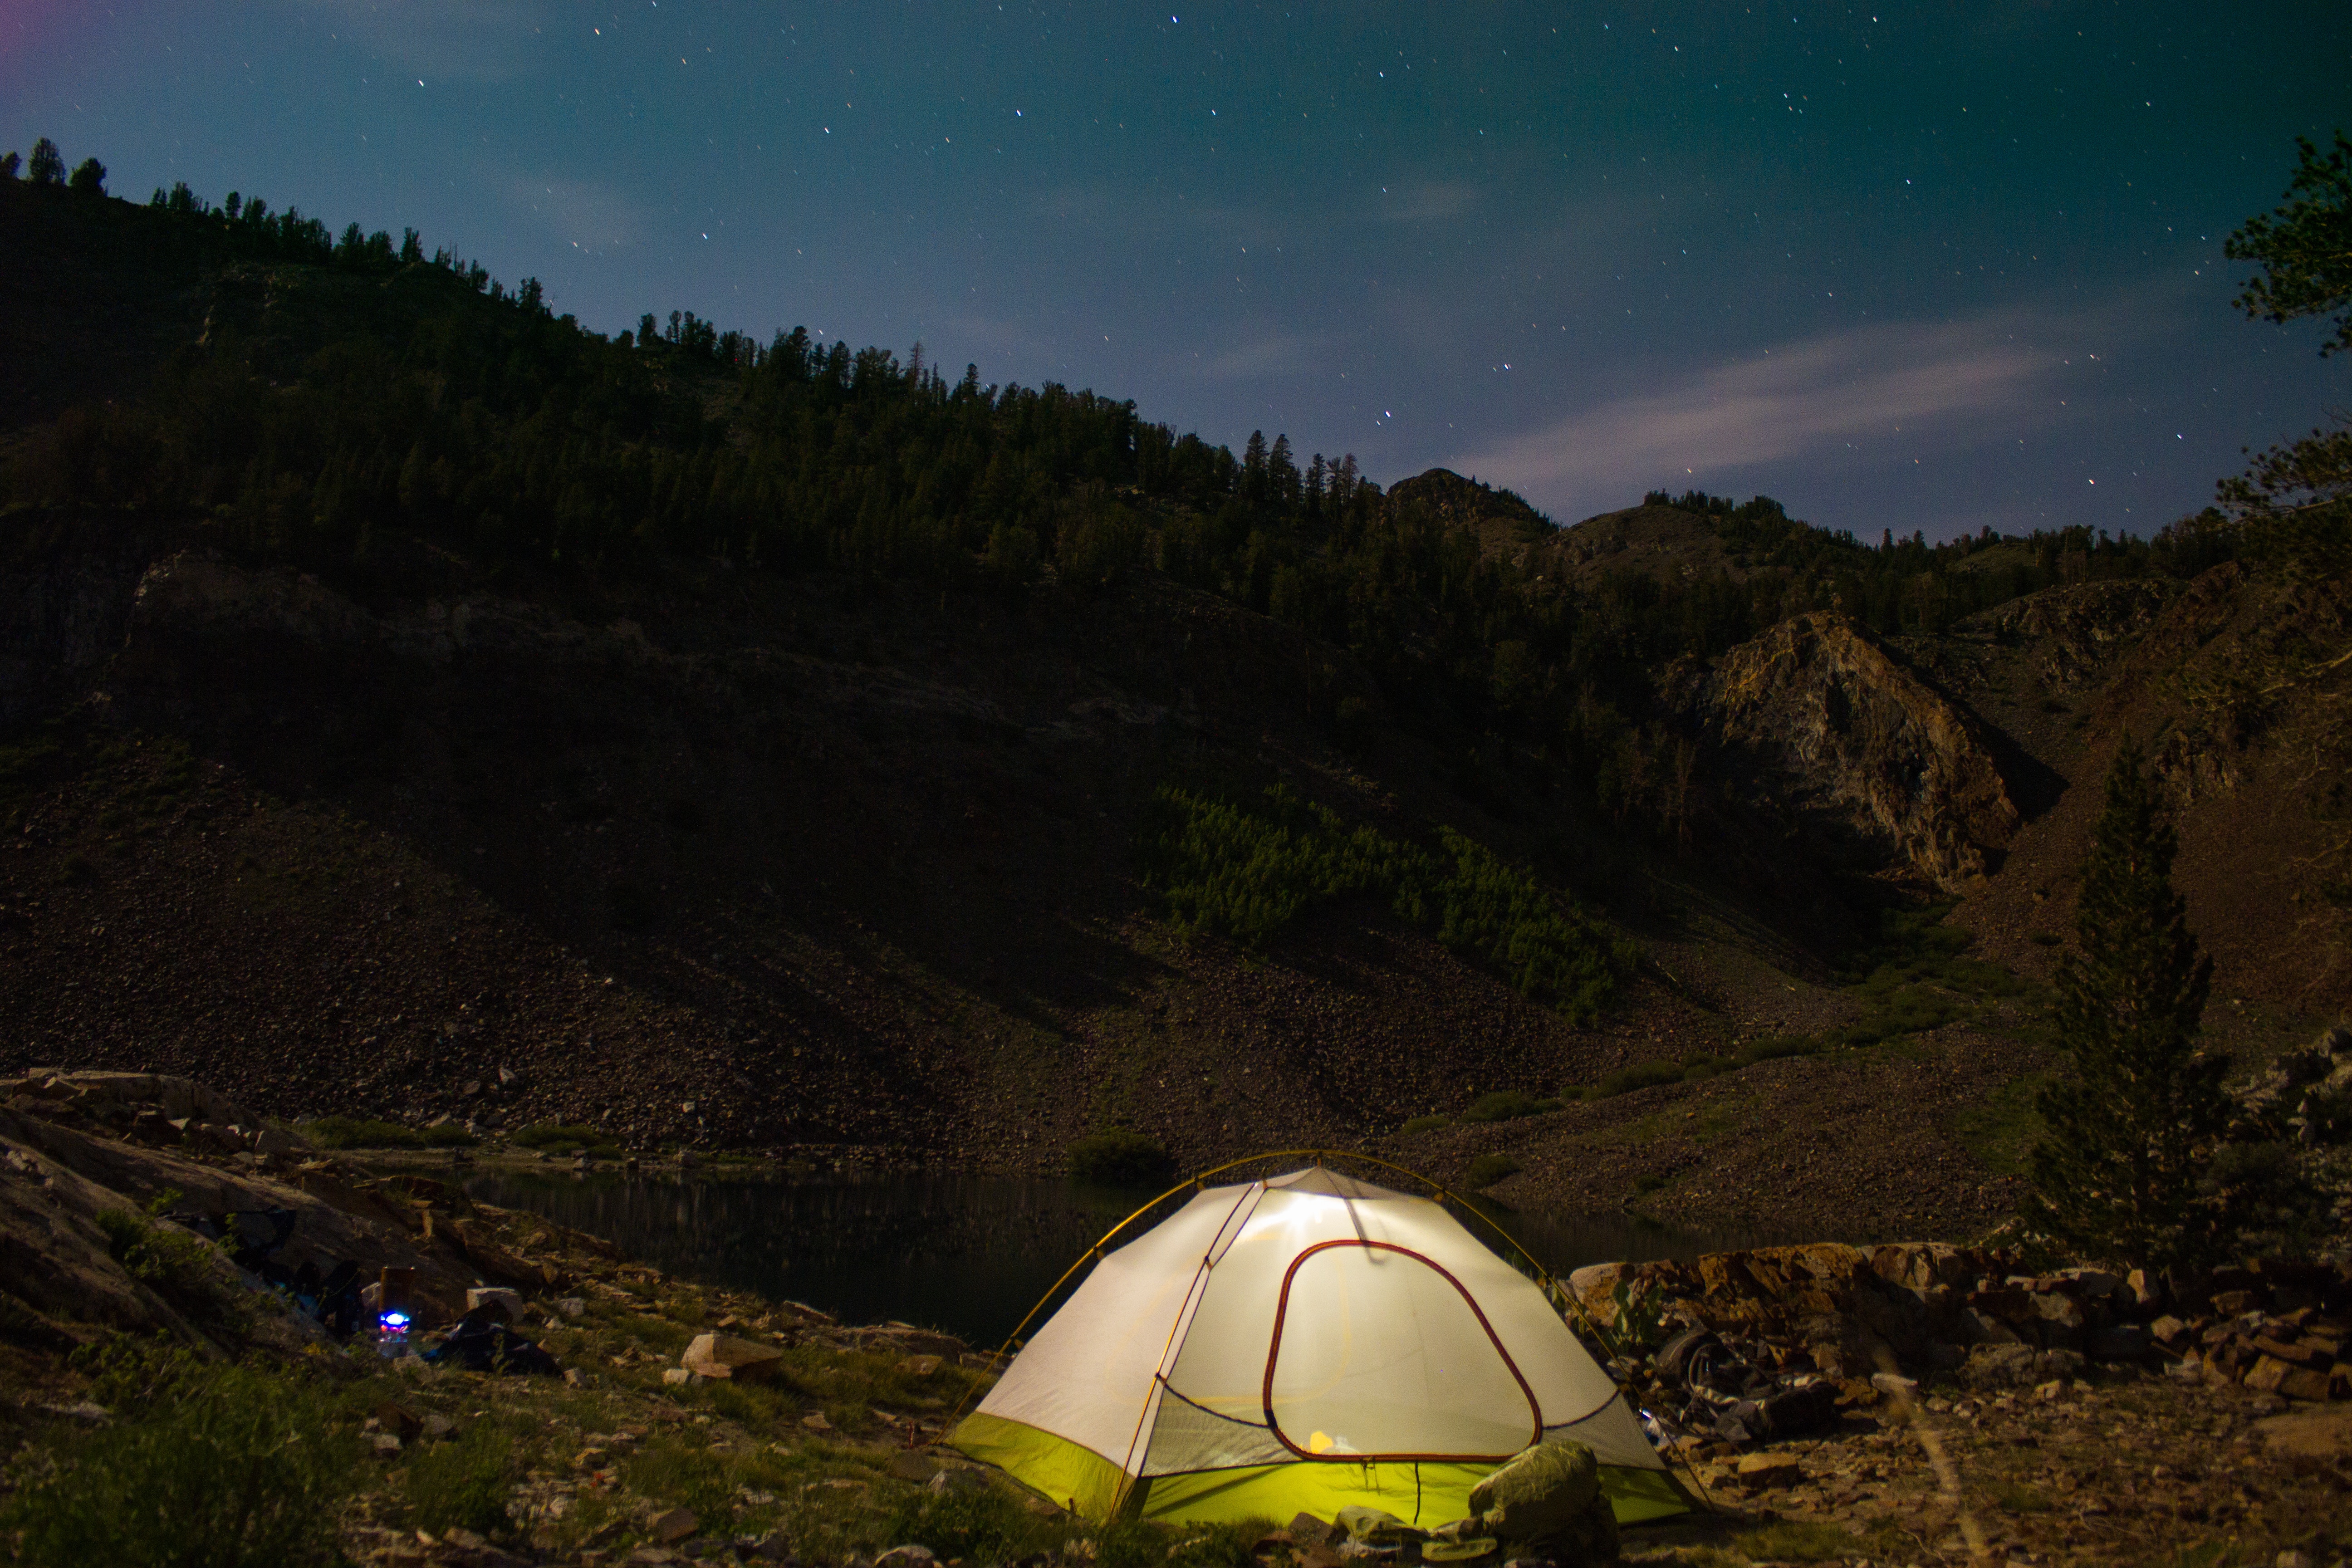 campsite, nature, mountains, lake, evening, tent, camping